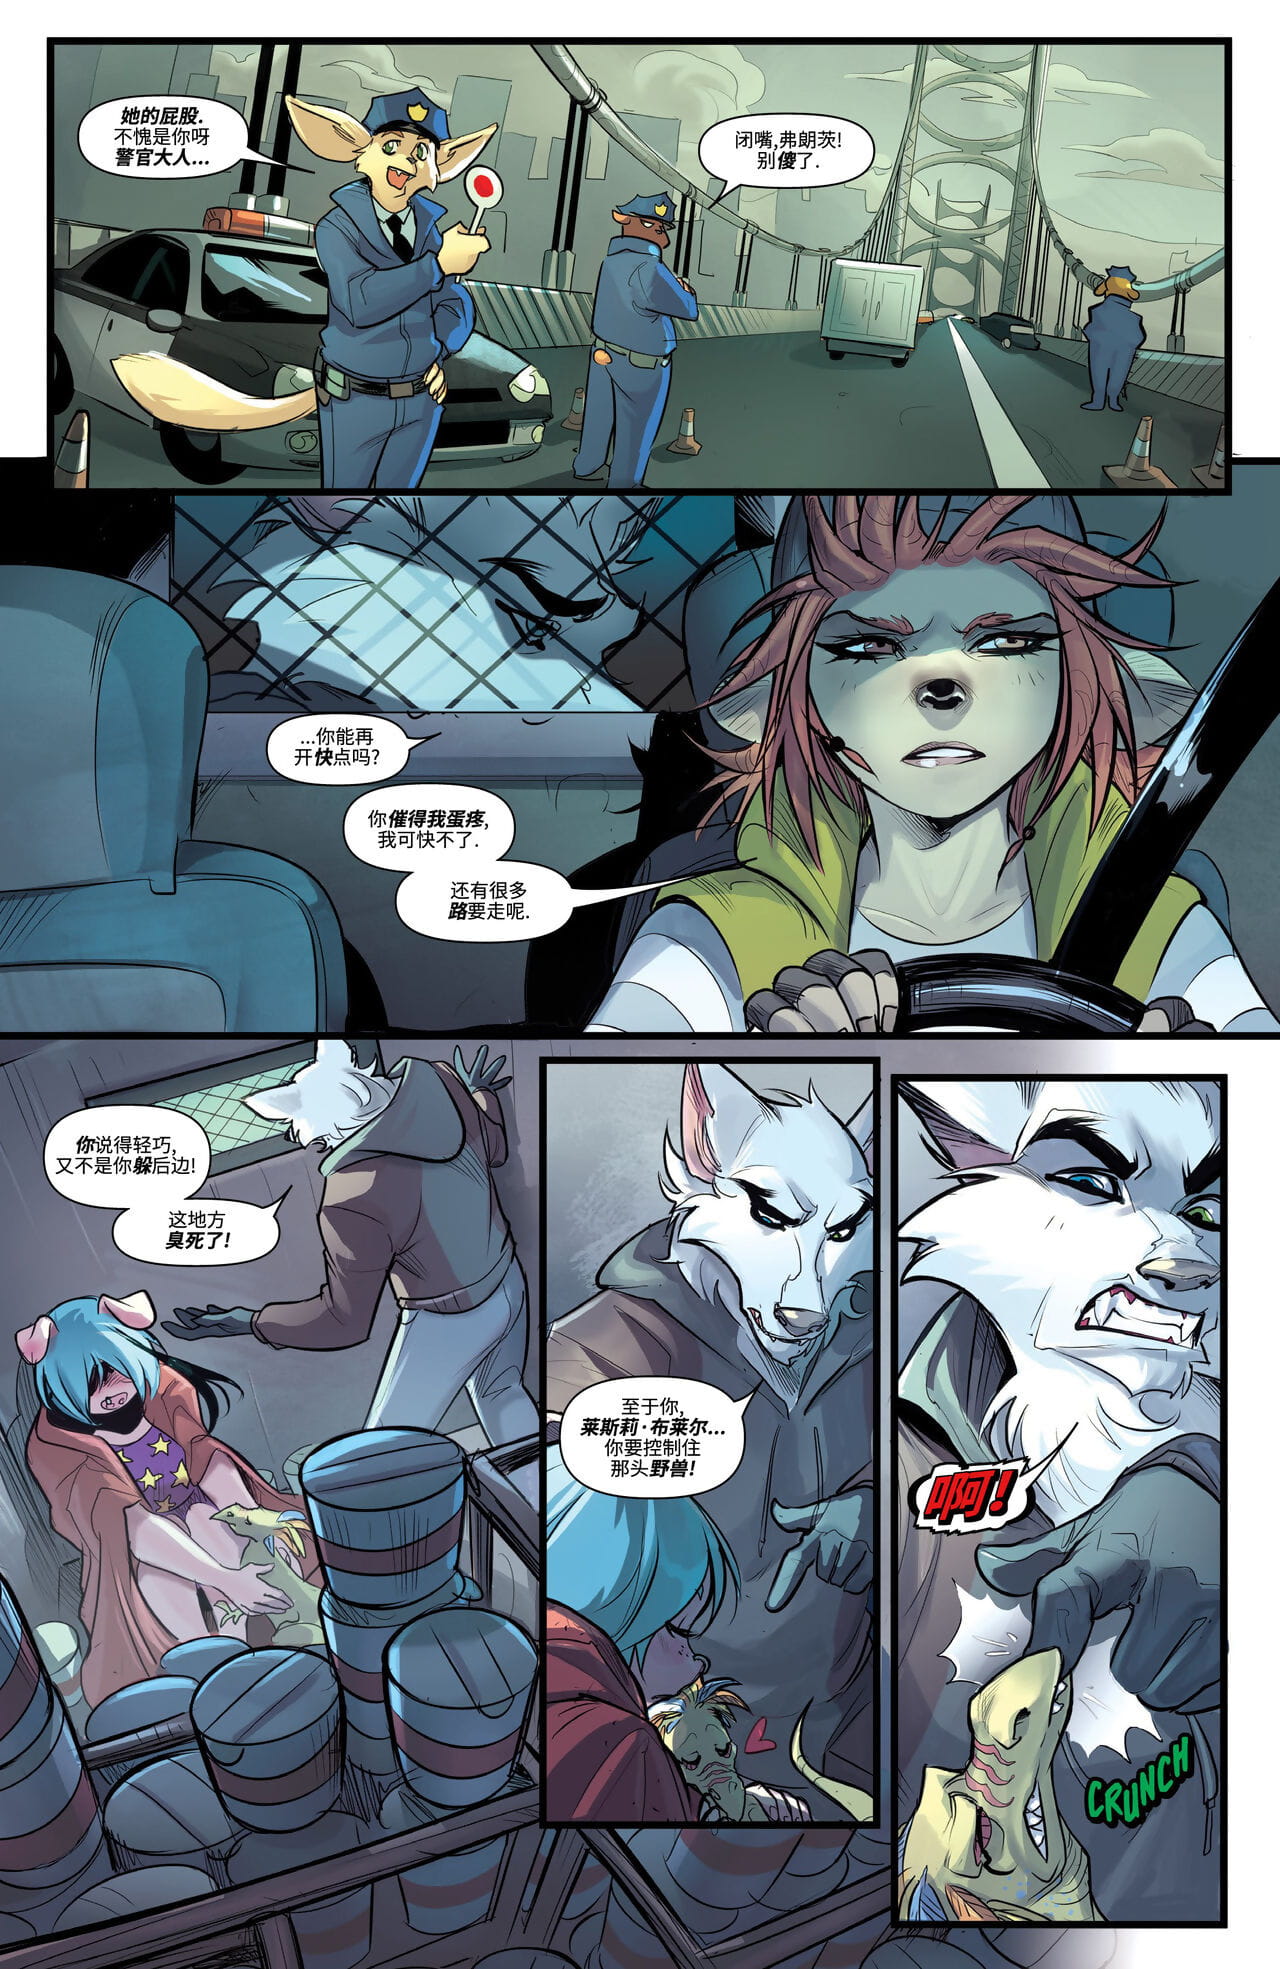 Unnatural - 反自然 - Issue 5 page 1